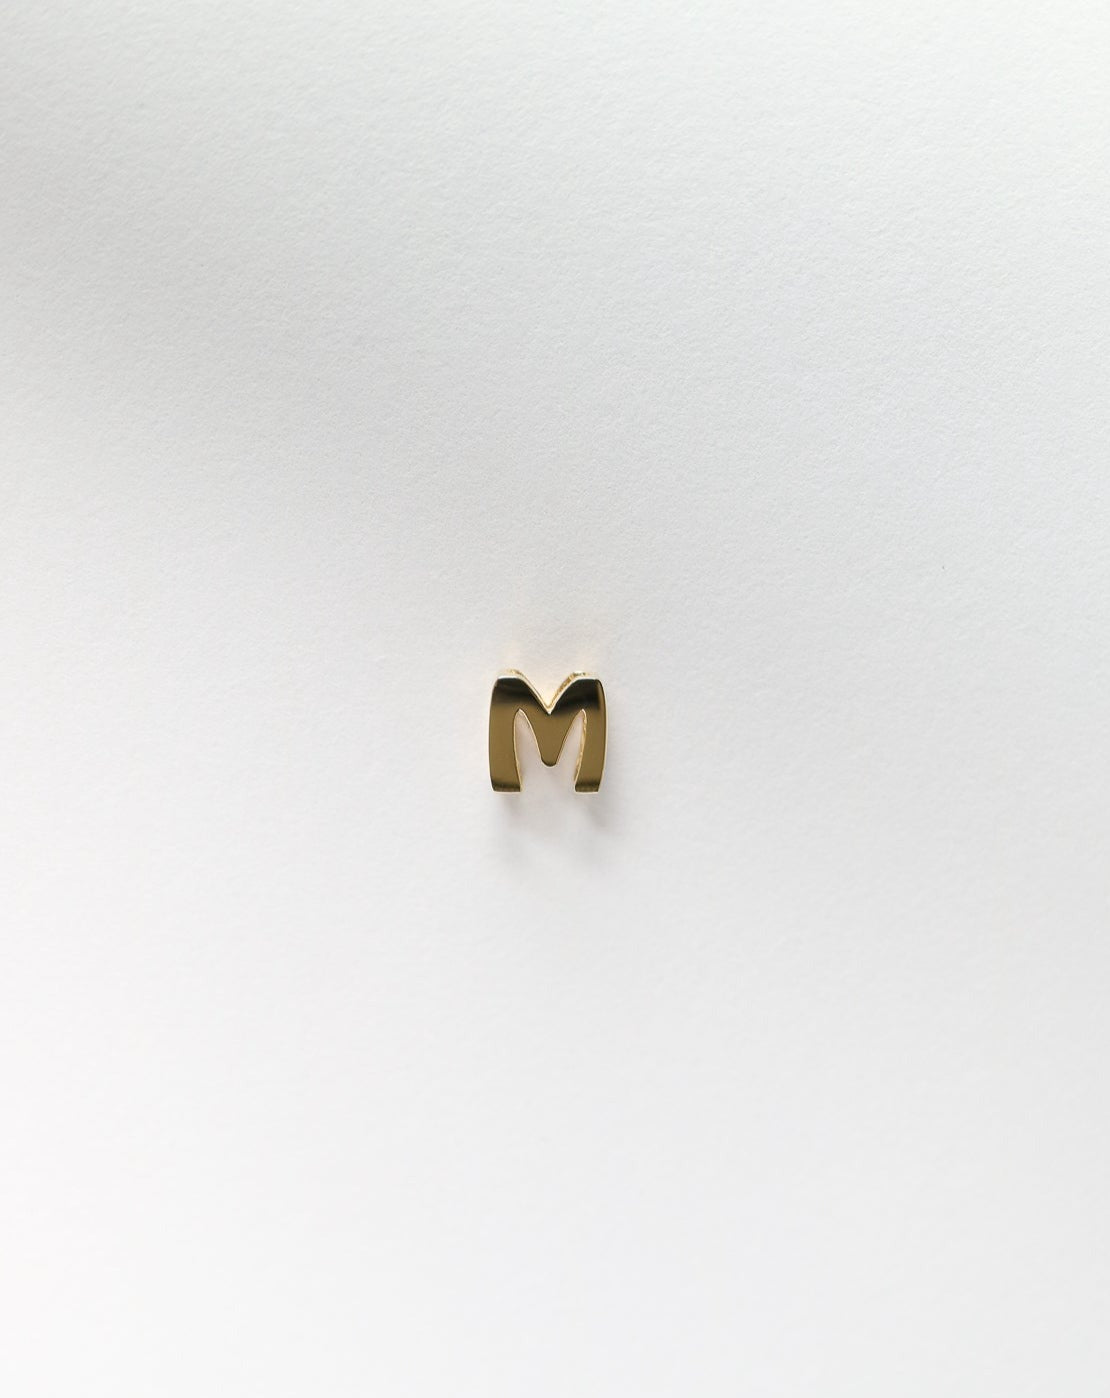 M initial charm letter pendant in 14kt gold